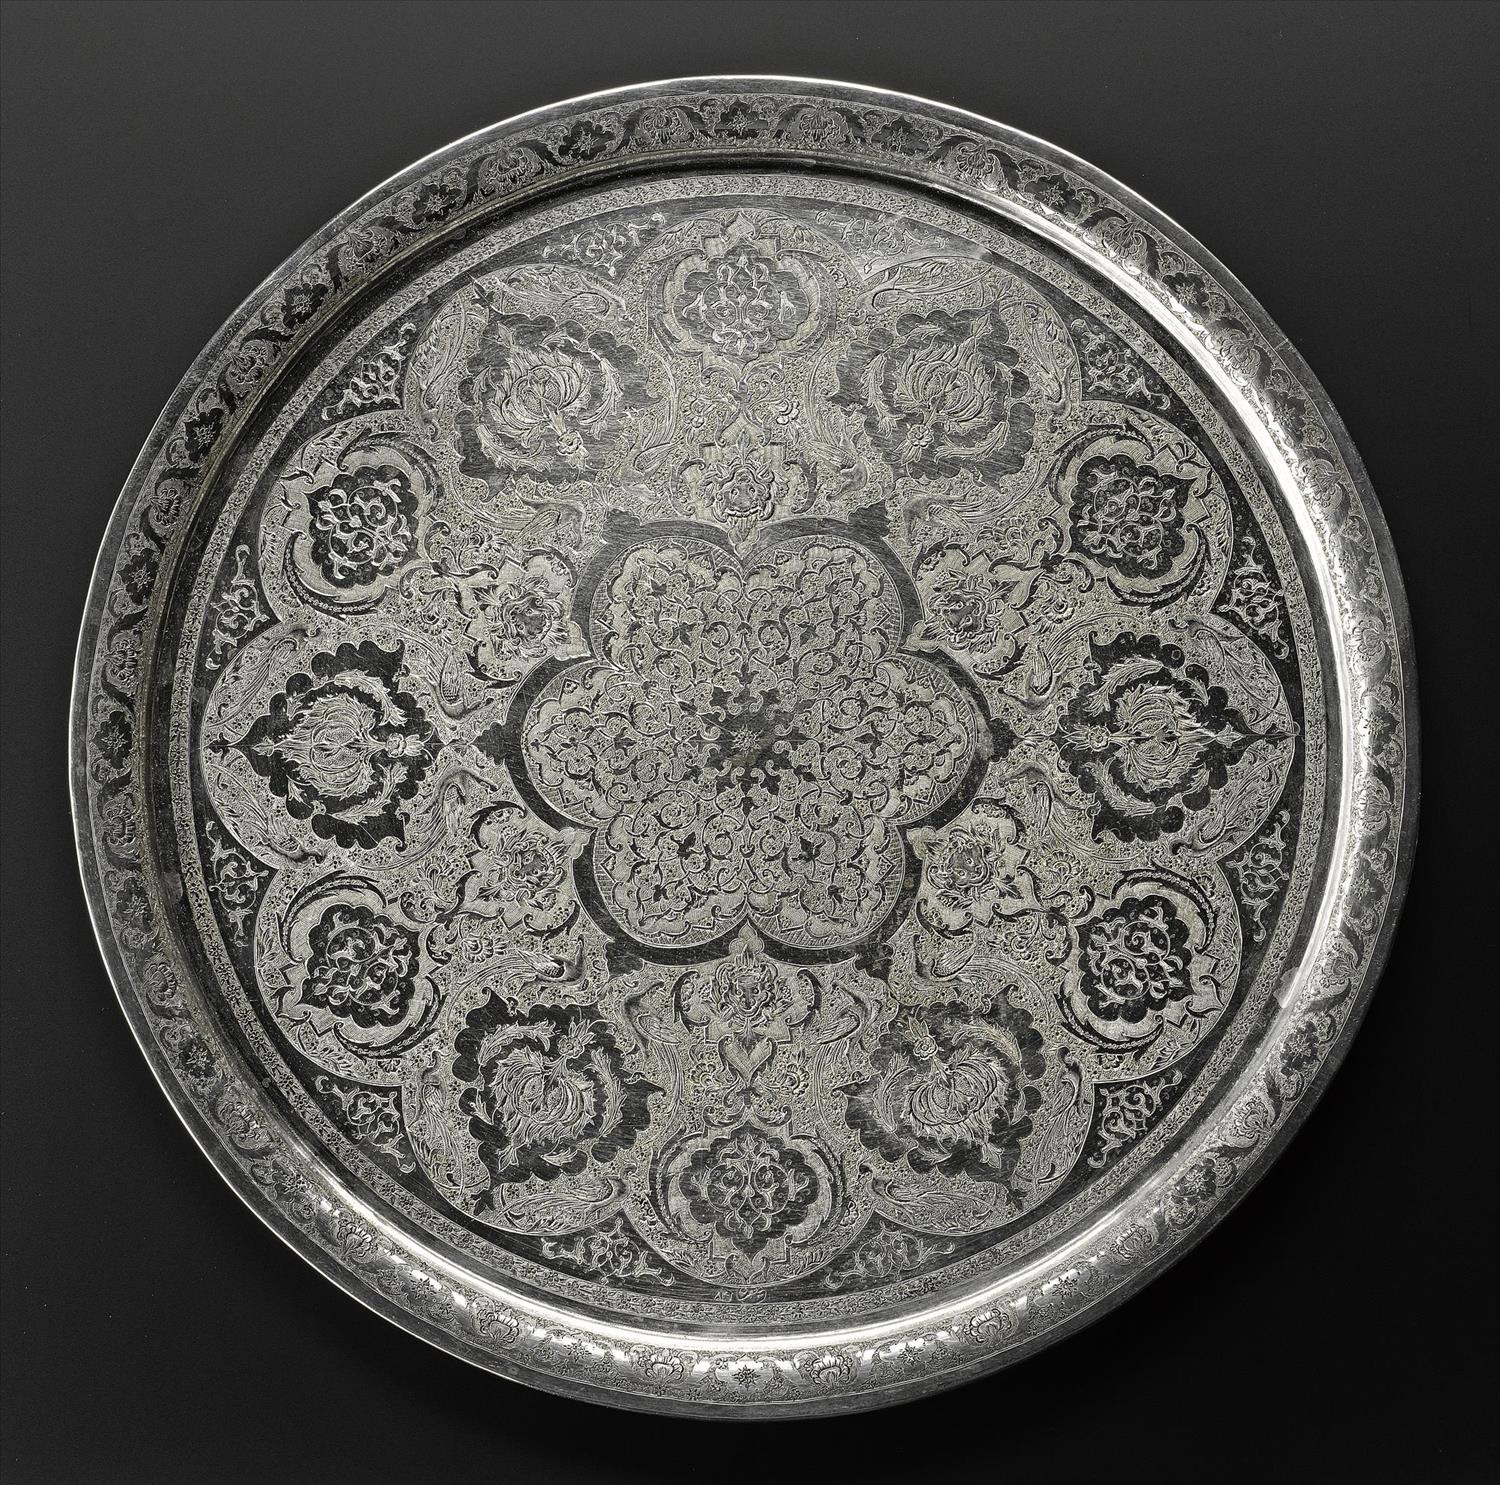 Circular tray of silver with a chased pattern of stylized floral motifs and animals, hallmarked on the front, Iran, probably Isfahan, 1920s-1940s, acc. no V.2015.62